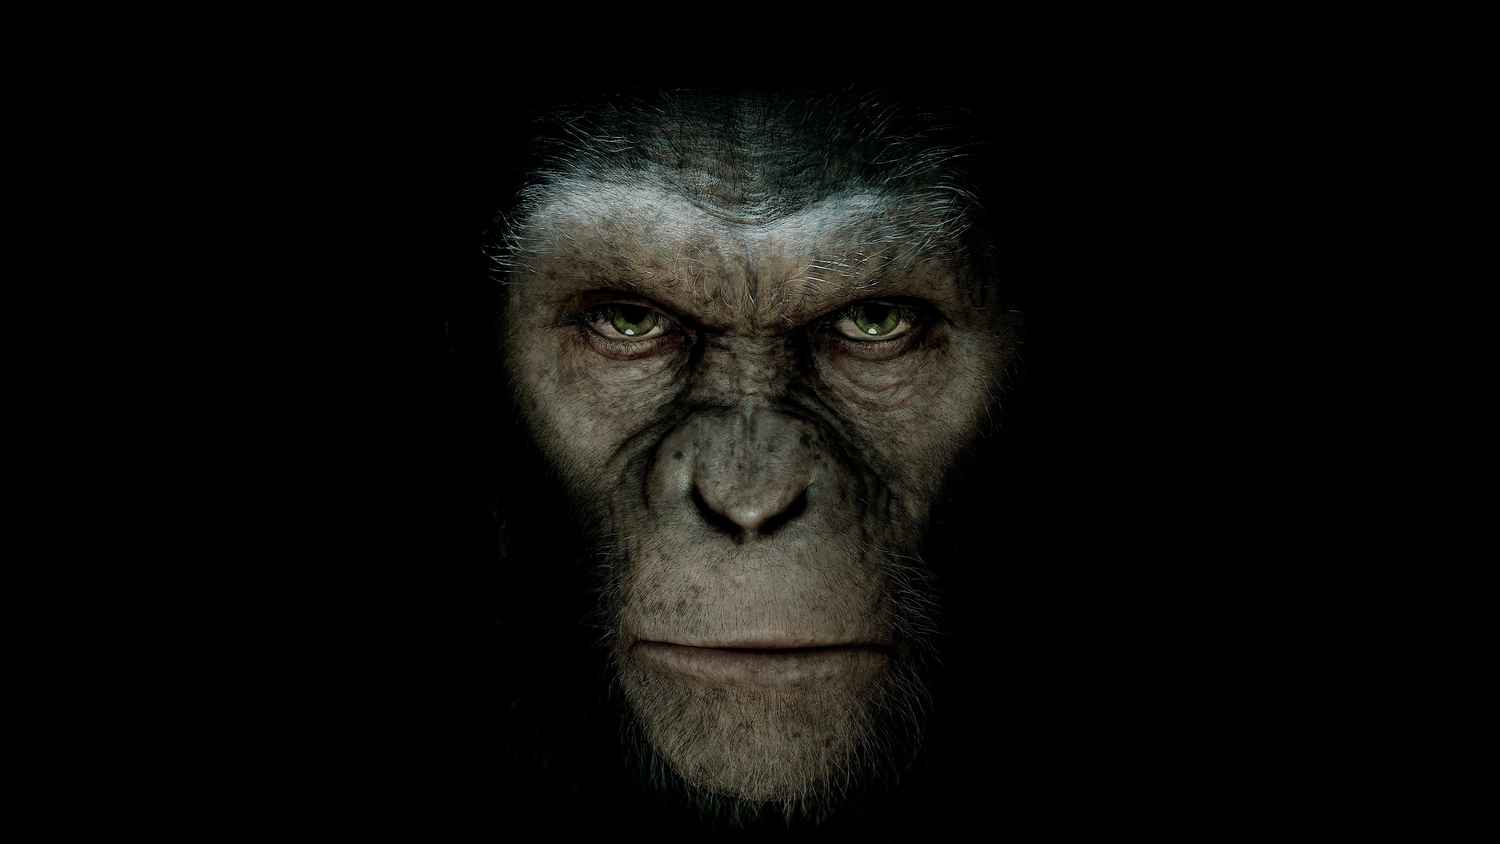 war of the planet of the apes full movie putlockers